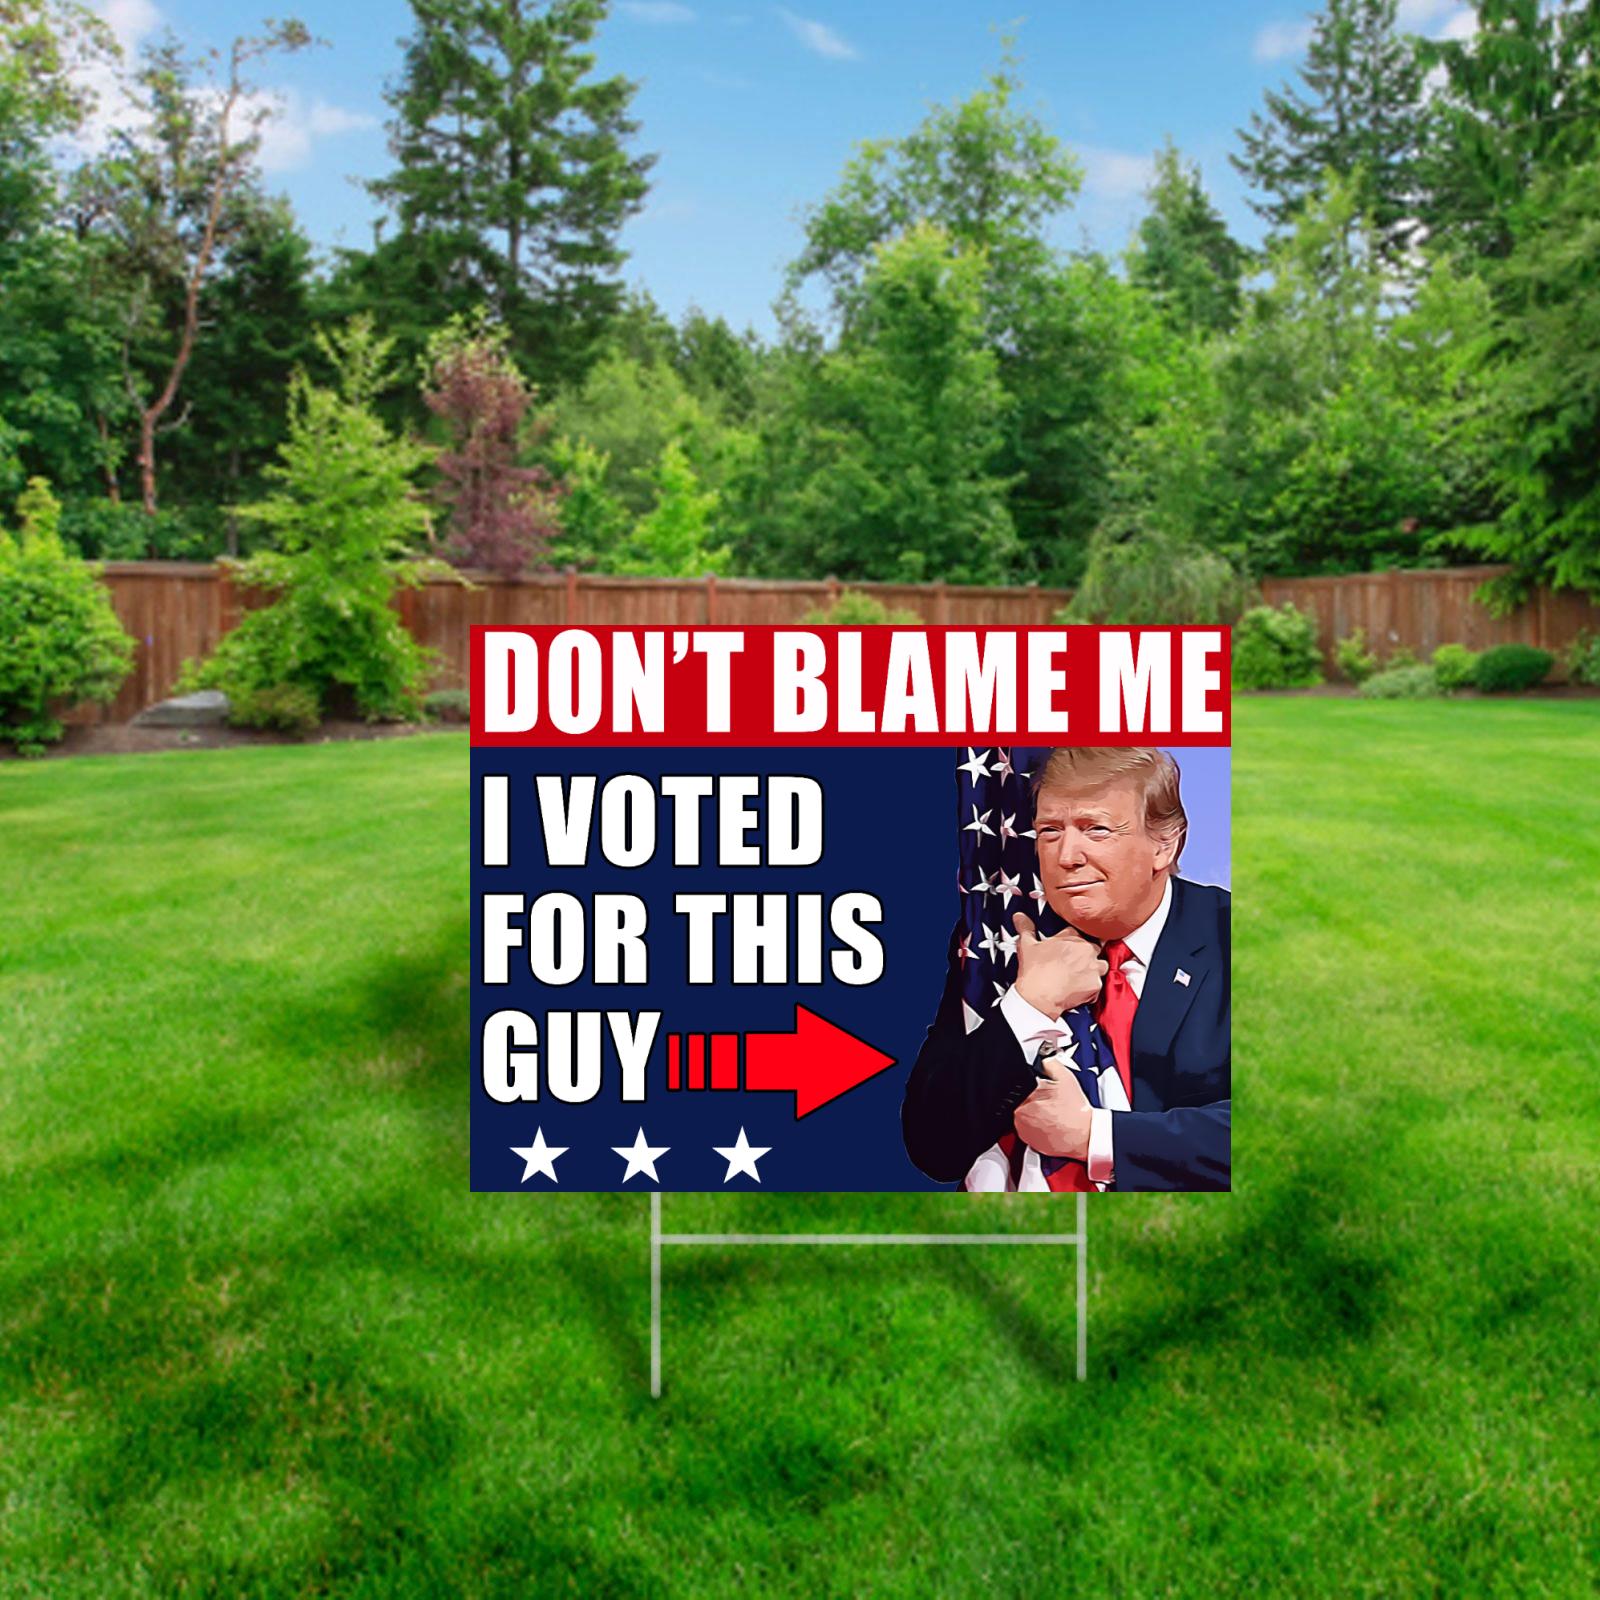 Don't Blame Me | One-sided Yard Sign - Rise of The New Media